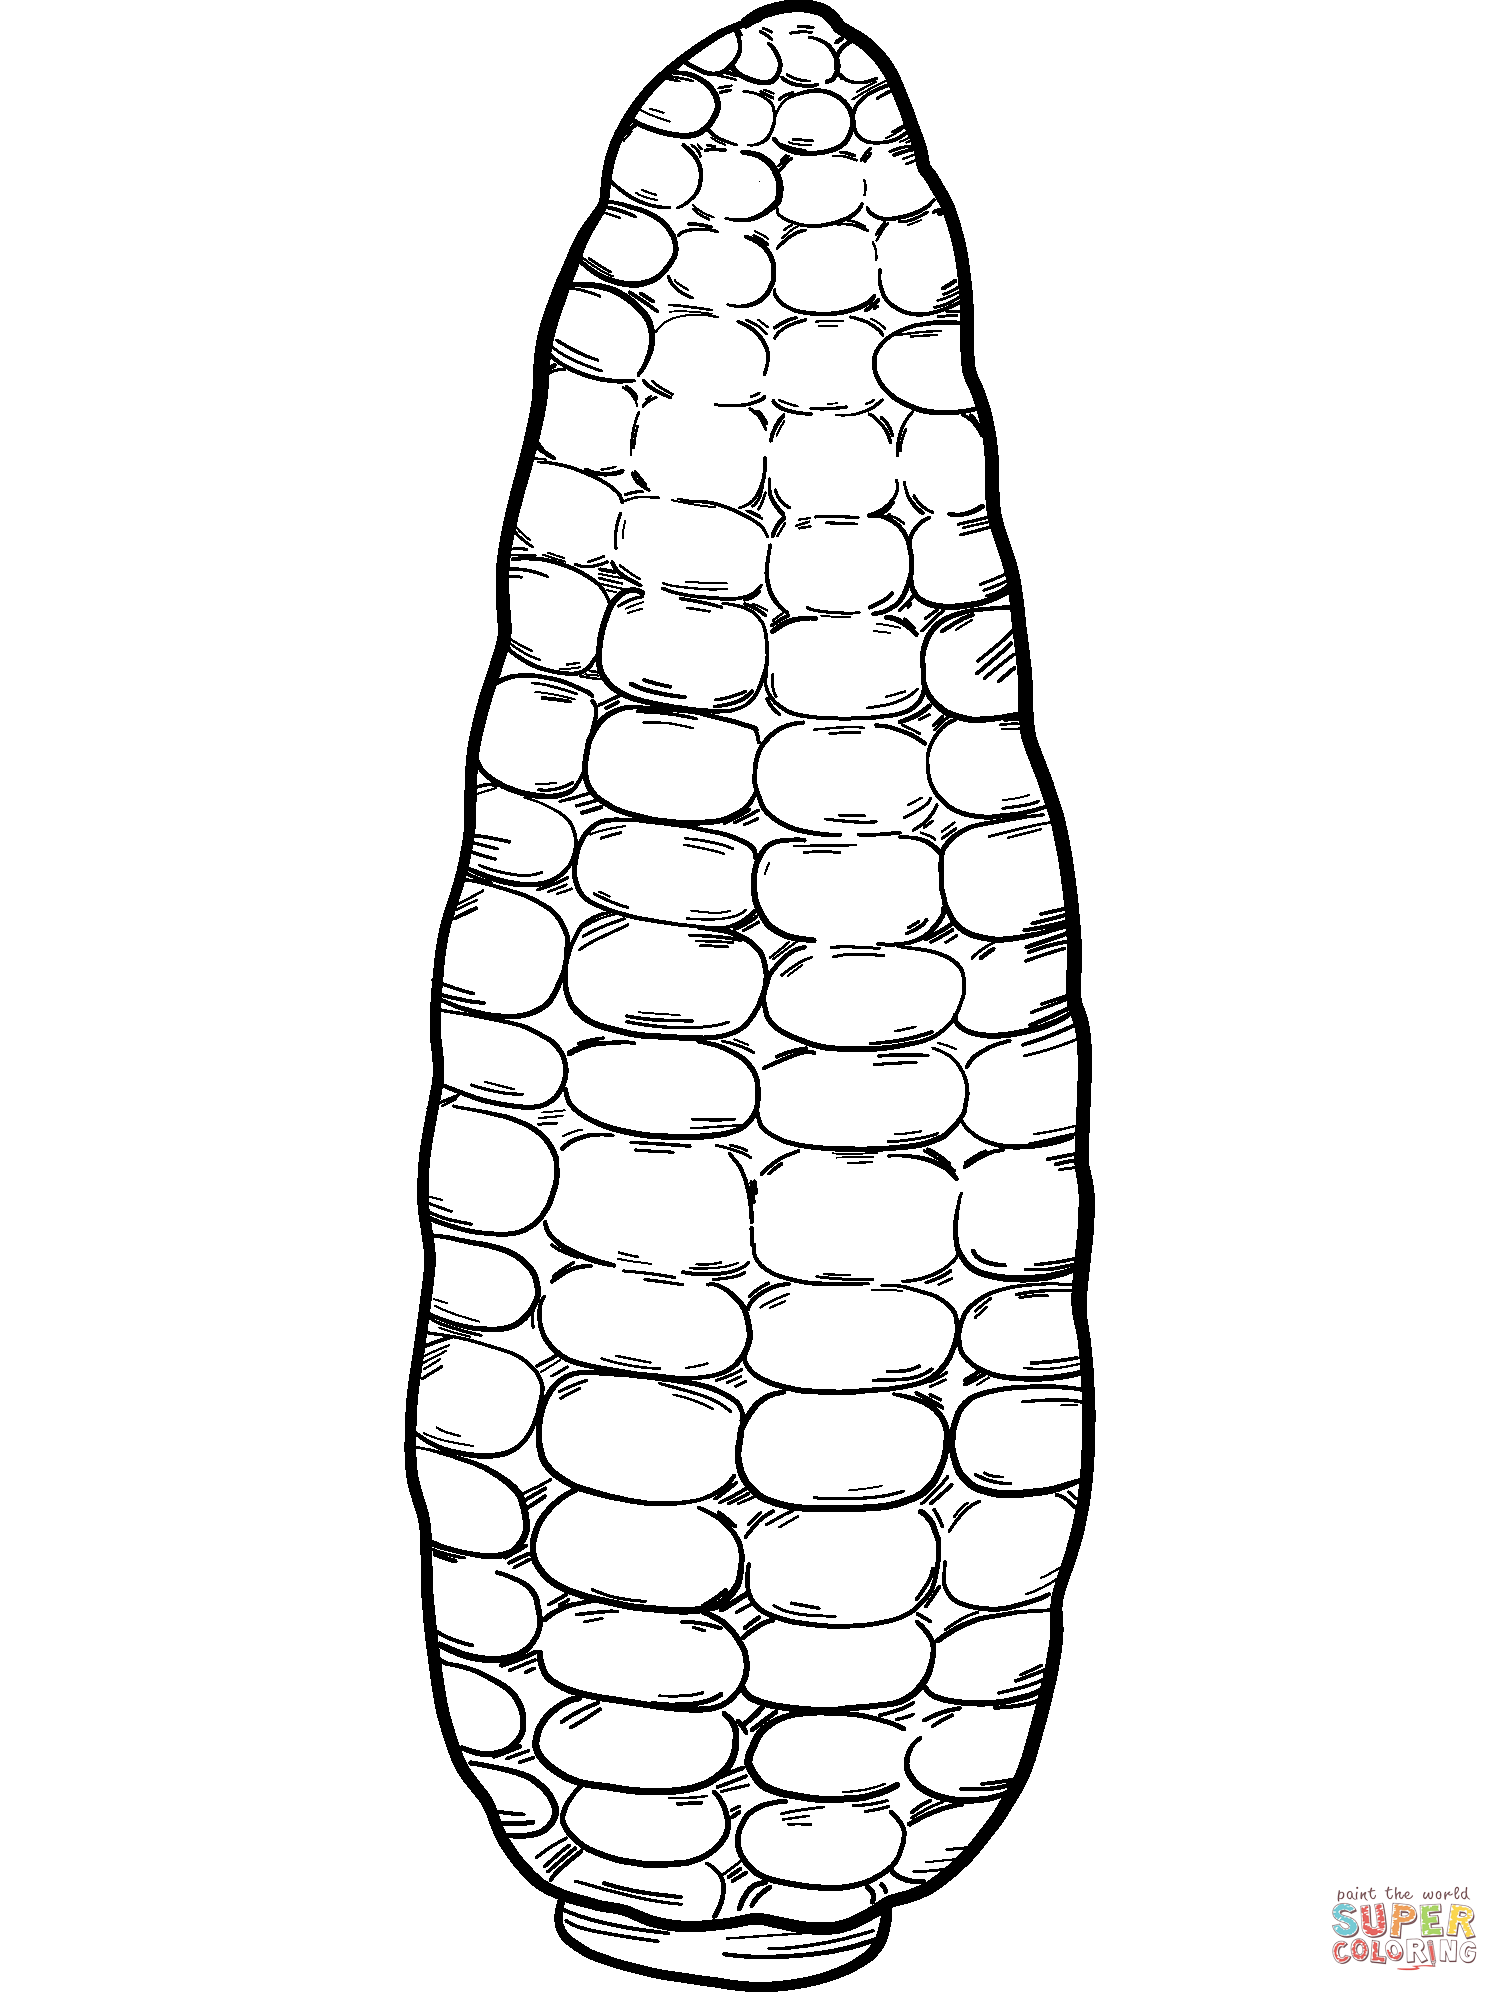 Corn coloring page free printable coloring pages